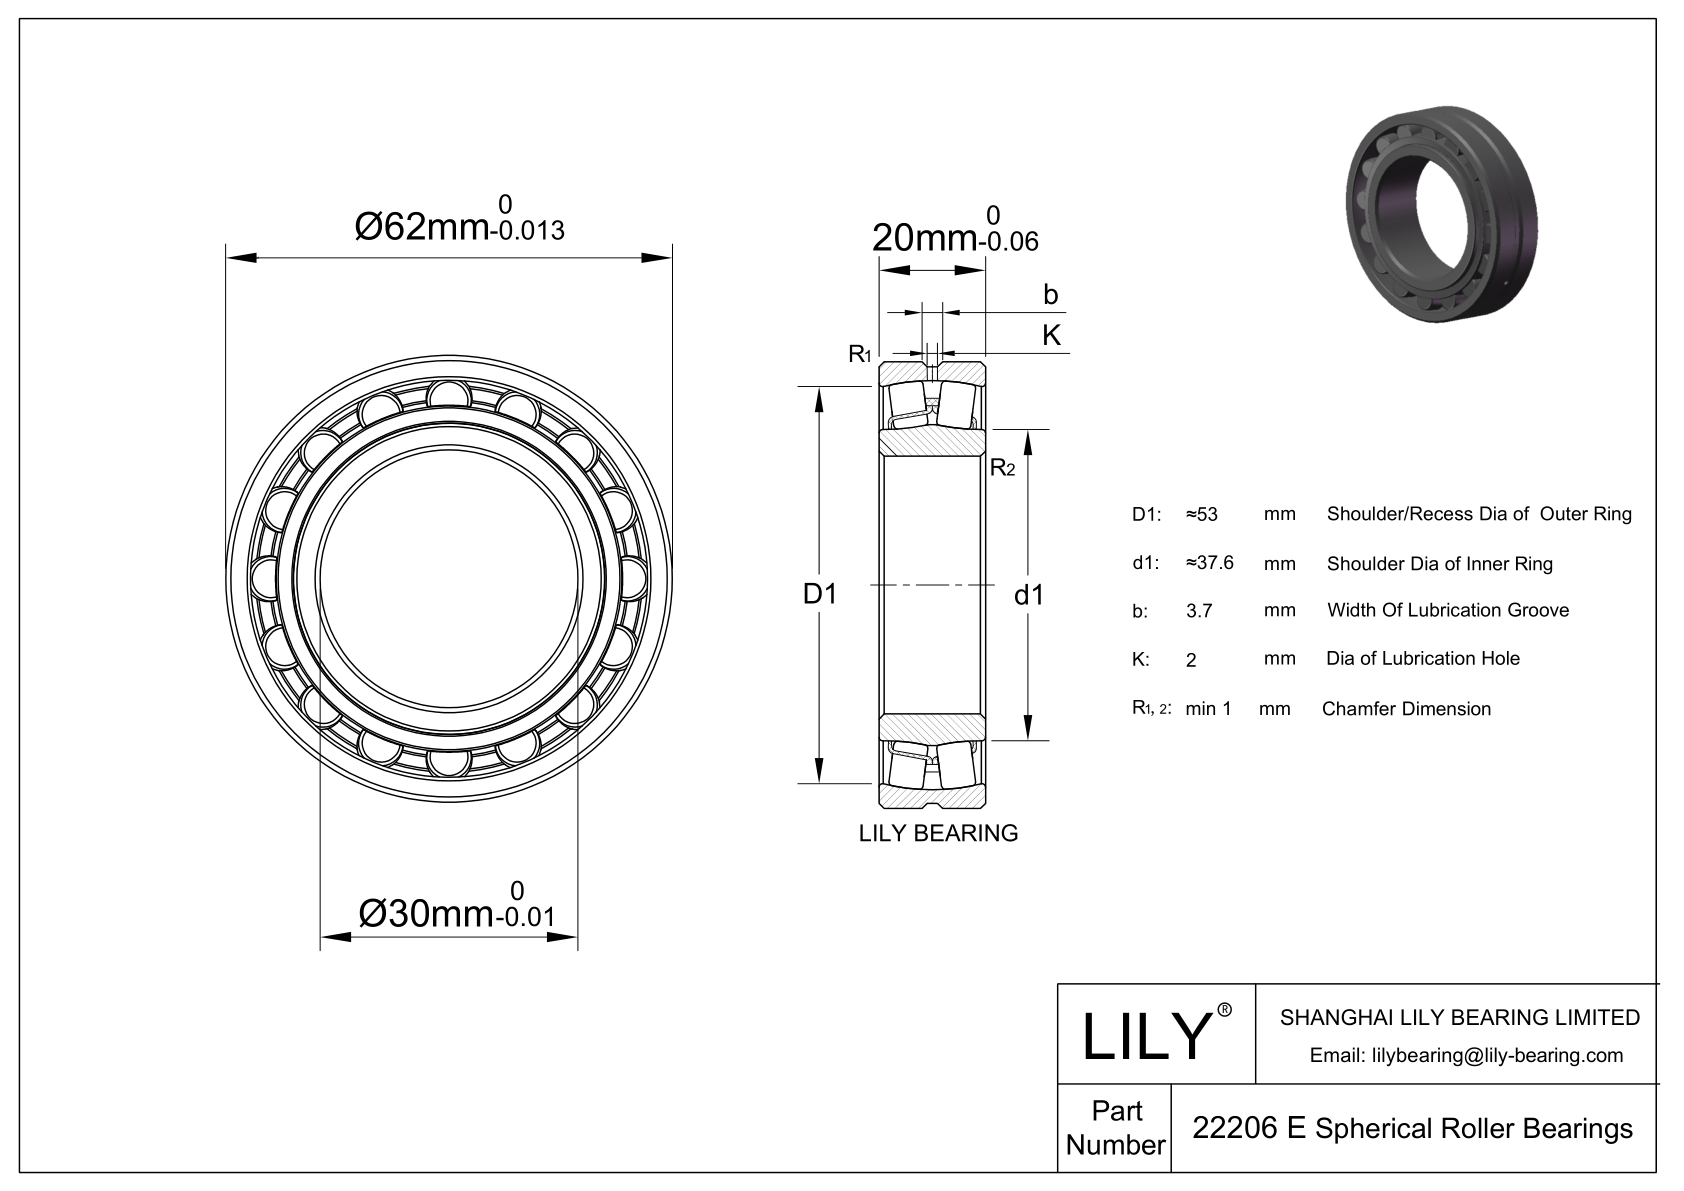 22206 E Double Row Spherical Roller Bearing cad drawing